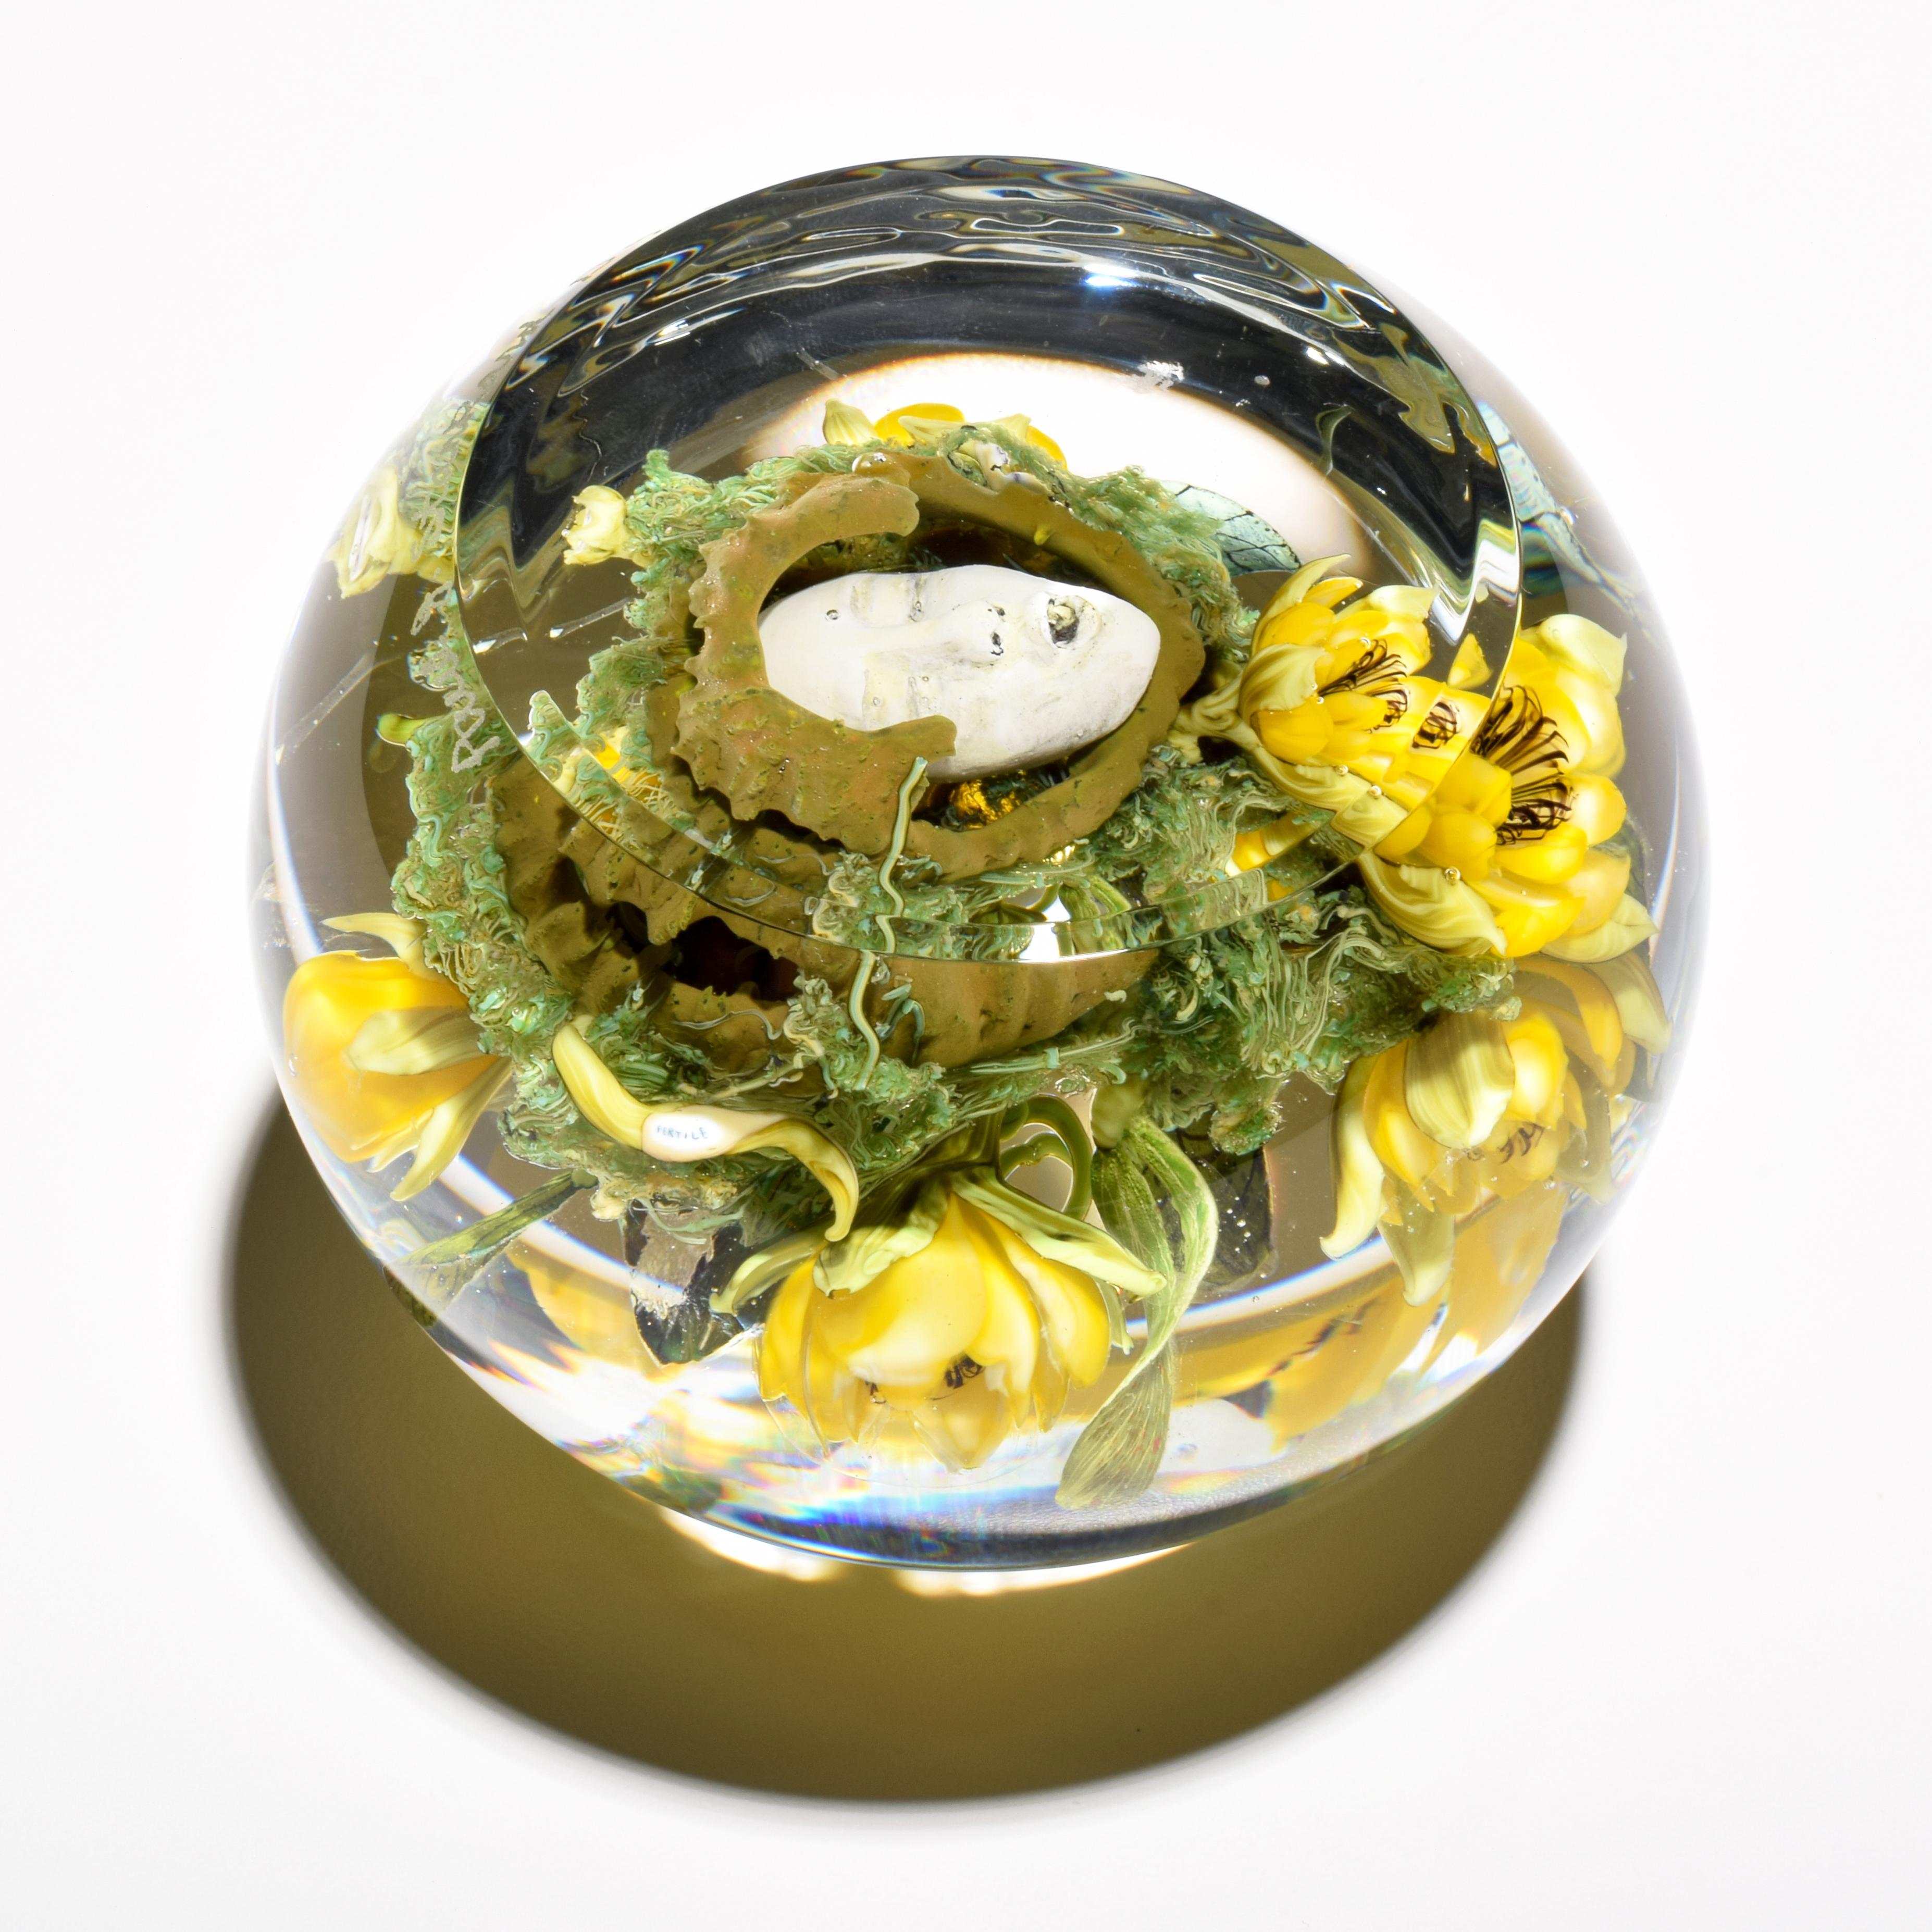 Paul J. Stankard Honeycomb, Flowers & Mask Oblate Paperweight For Sale 3